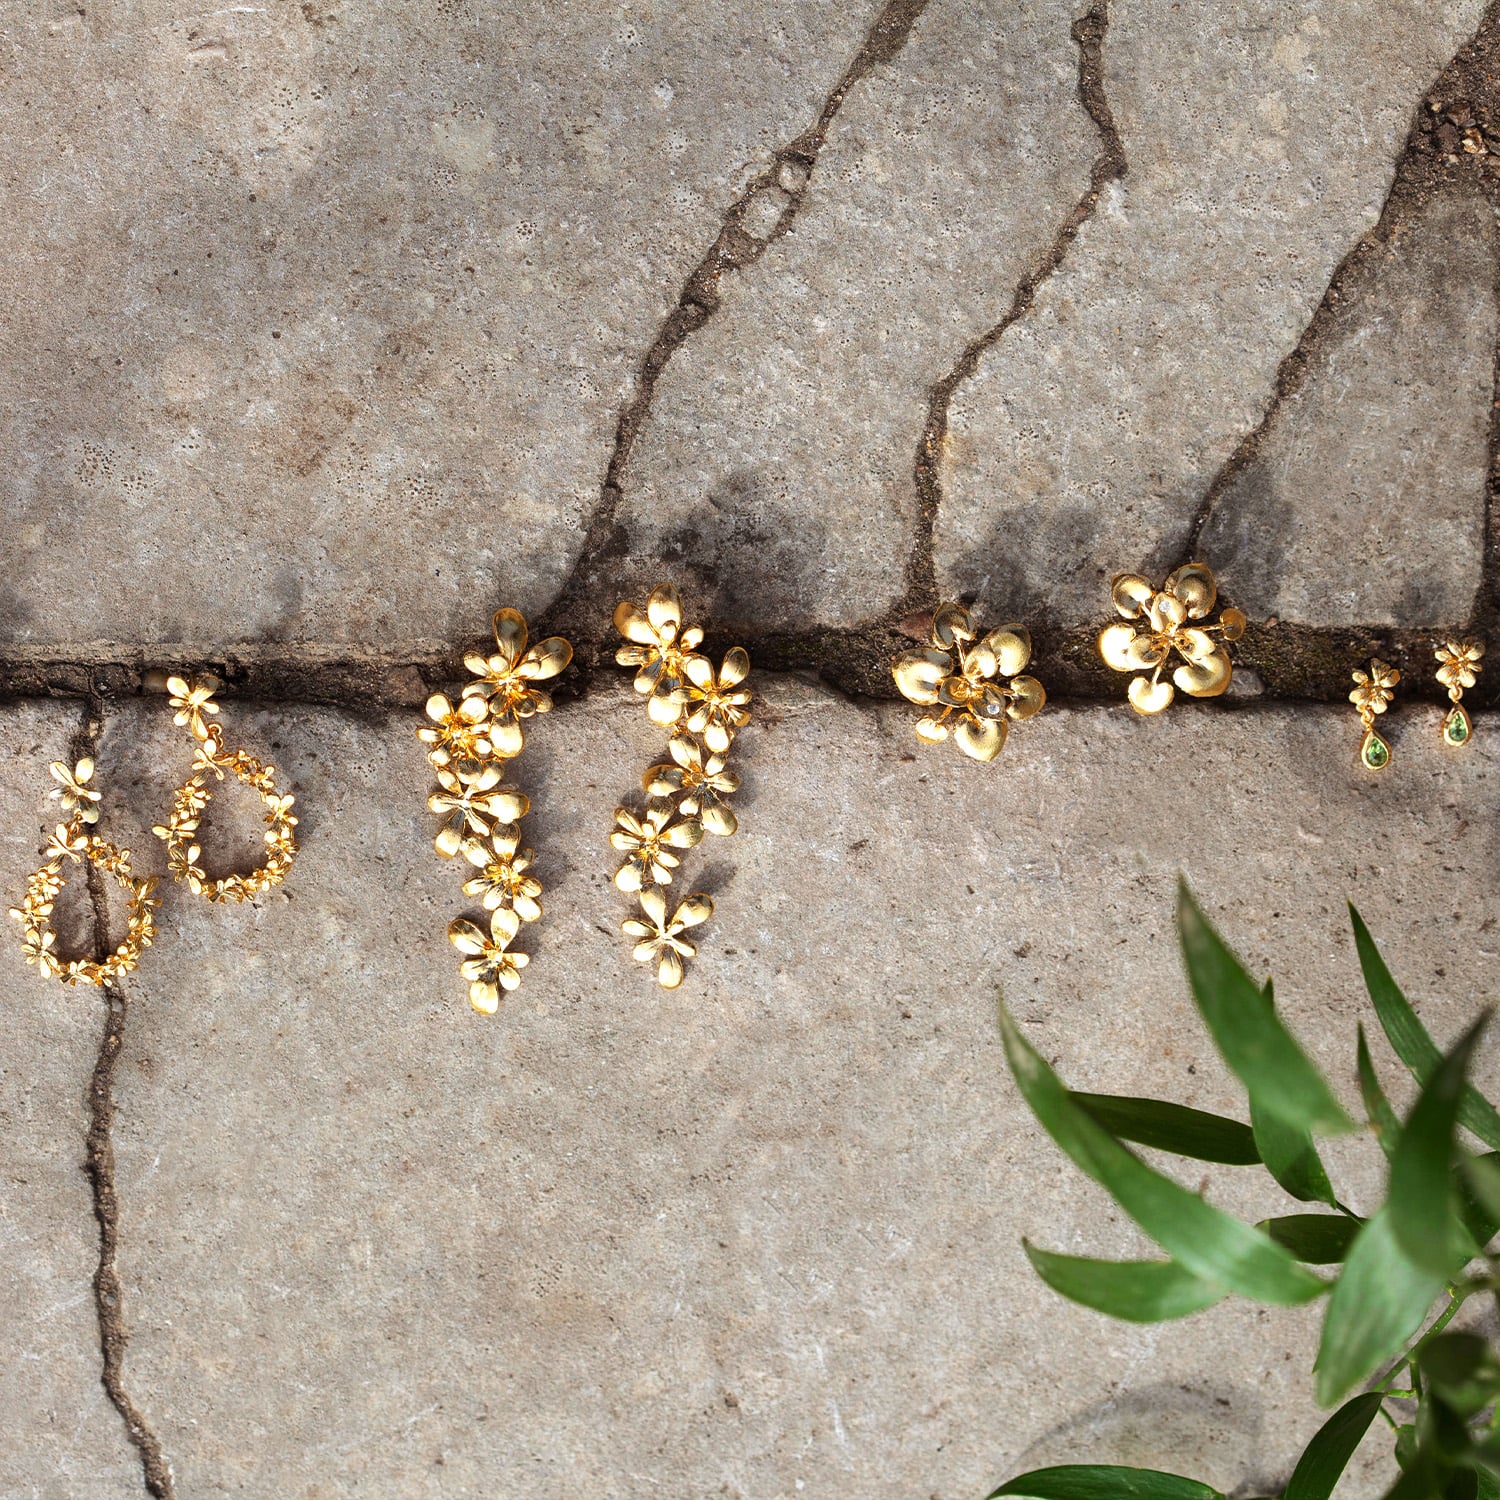 Humble Beginnings gold plated earrings photographed on cracks in concrete pavements by Alex Monroe Jewellery